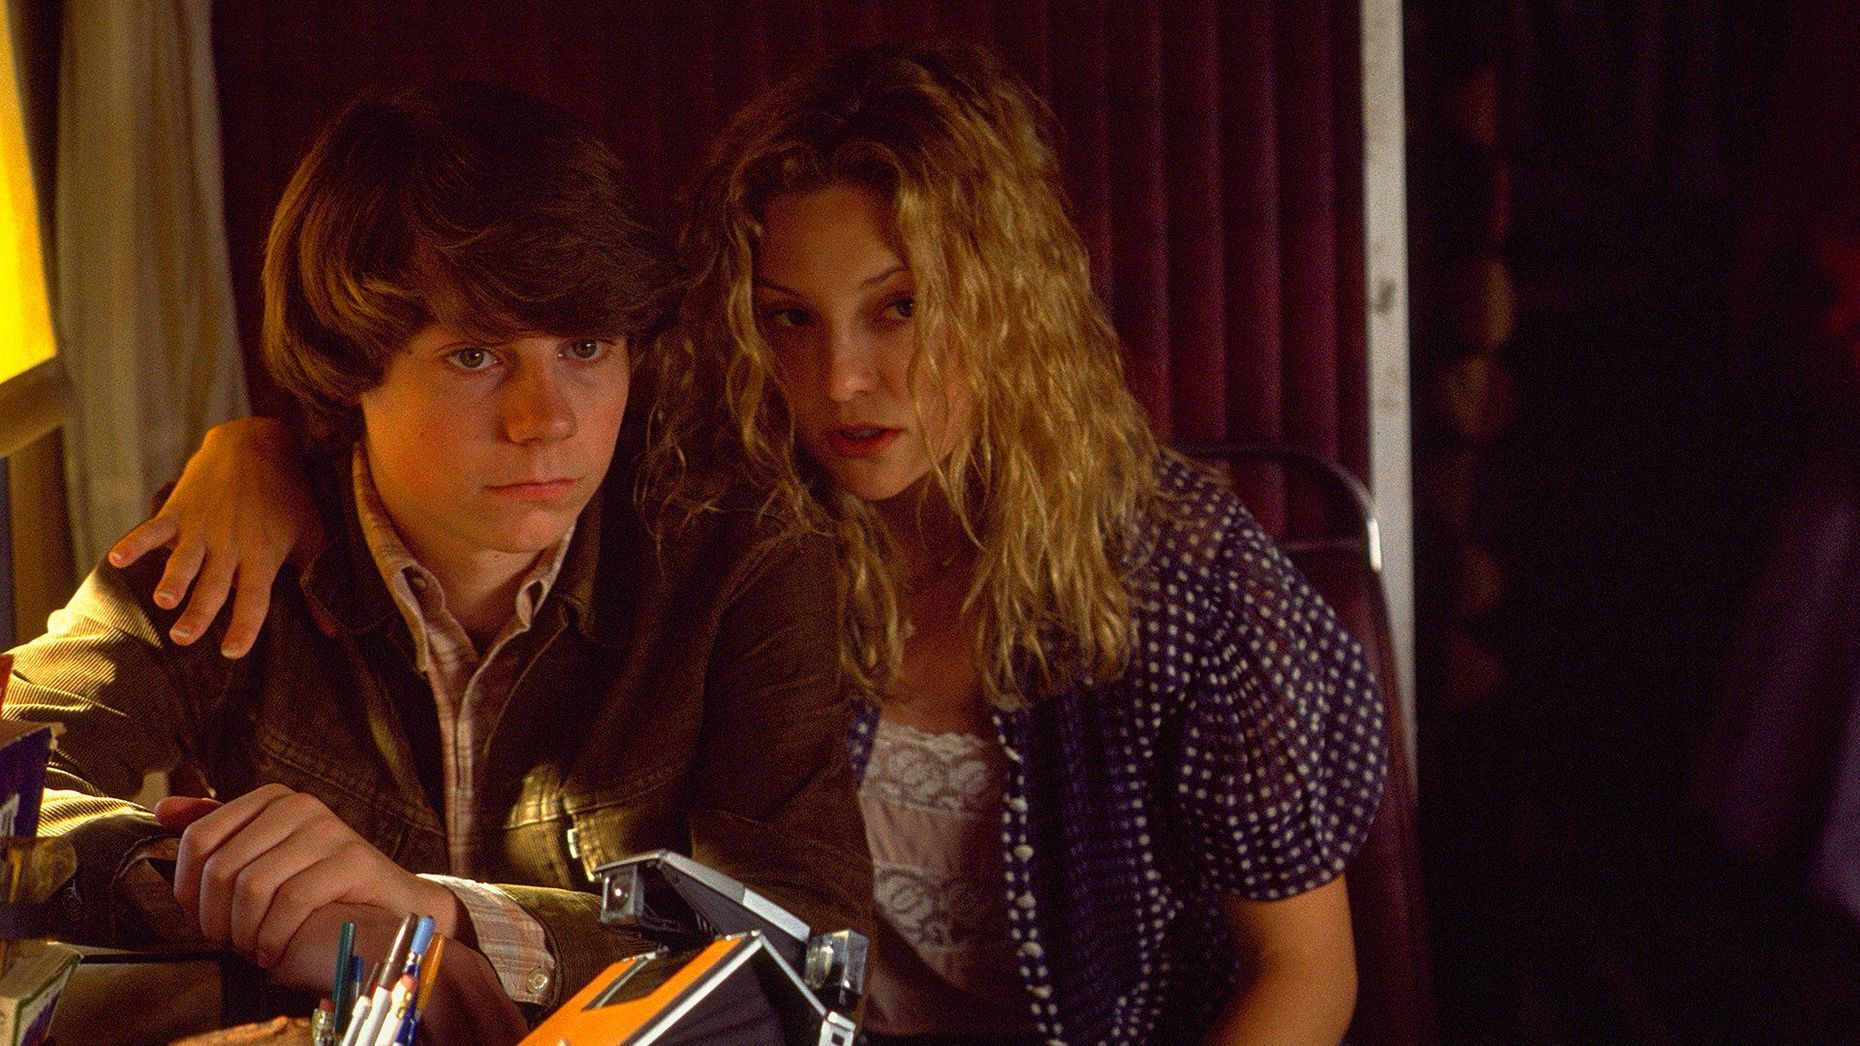 <p>Although its tone is heavily nostalgic and sentimental, <a href="https://www.imdb.com/title/tt0181875/?ref_=nv_sr_srsg_0" class="atom_link atom_valid"><em>Almost Famous</em></a> is genuinely touching thanks to the charismatic performances of its cast, which includes Frances McDormand, Billy Crudup, and Philip Seymour Hoffman, and its many memorable scenes set to a 1970s rock-and-roll soundtrack. The film was written and directed by Cameron Crowe, who <a href="https://www.rogerebert.com/reviews/almost-famous-2000" class="atom_link atom_valid">based the story</a> on his own experiences as a teenage music journalist.</p>